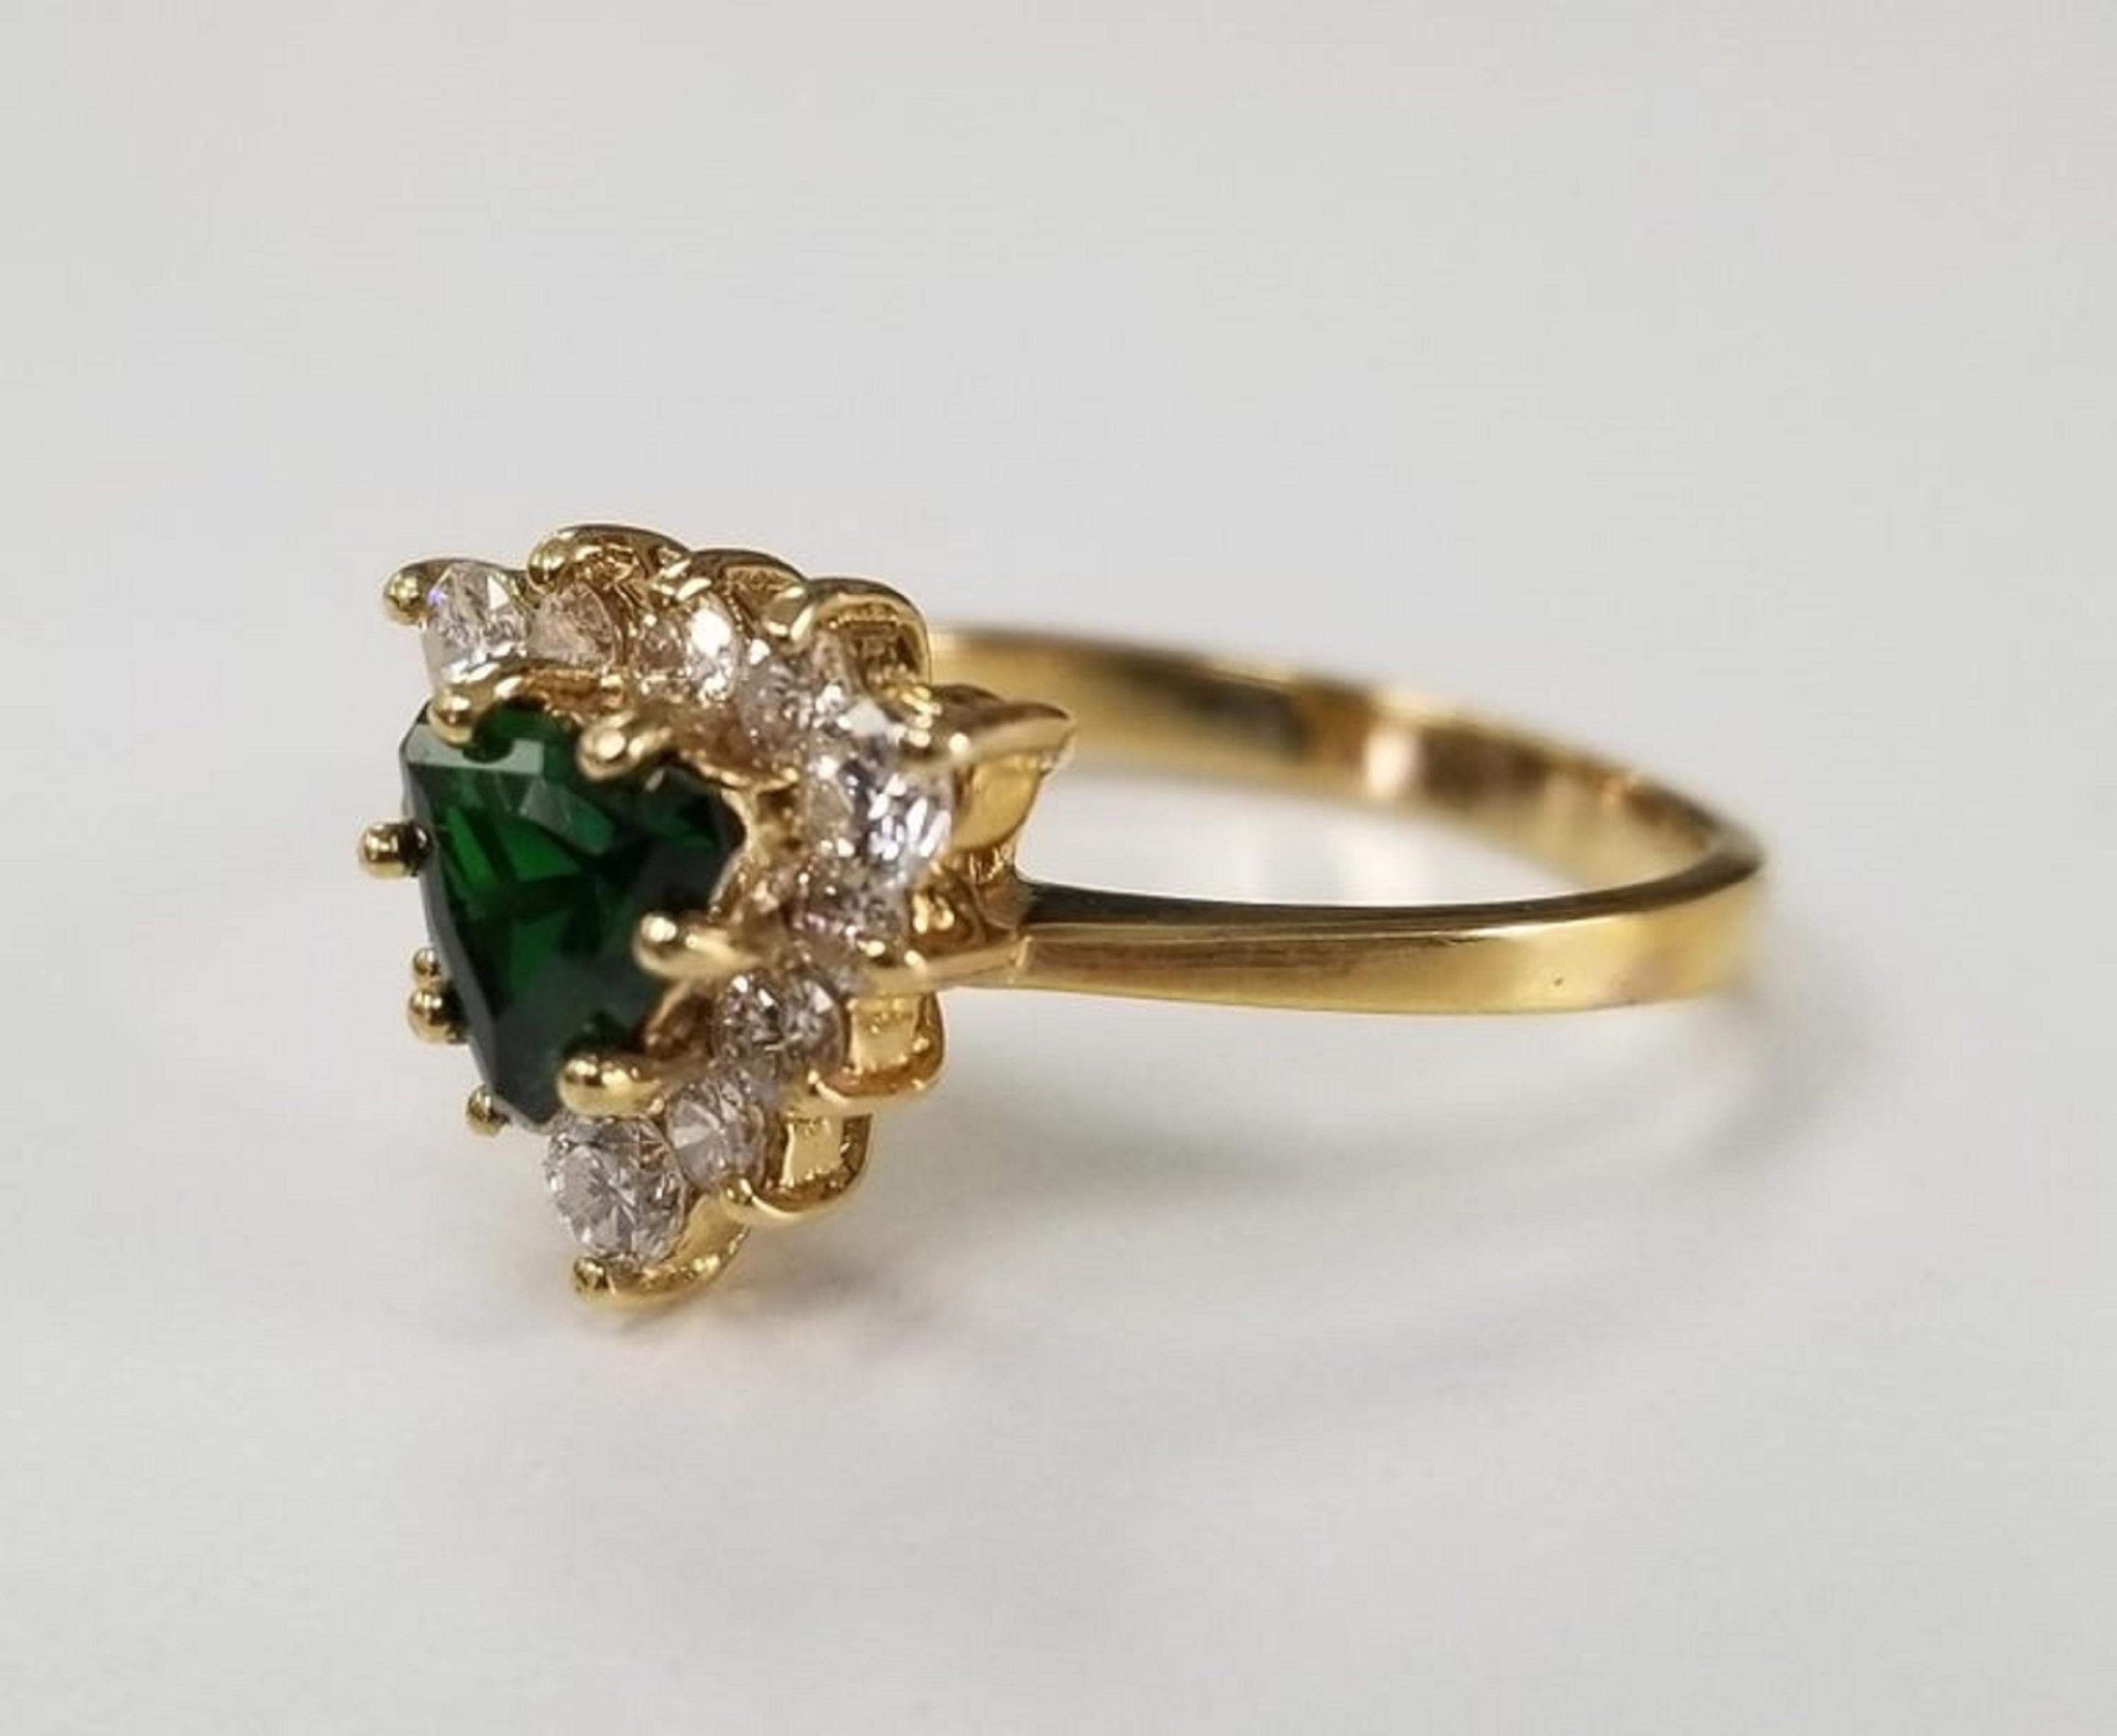 14k yellow gold tsavorite and diamond ring, containing 1 trillion cut  tsavorite weighing .87pts. and 12 round full cut diamonds of very fine quality weighing .55pts.  This ring is a size 6 but we will size to fit for free.

Tsavorite is a trade